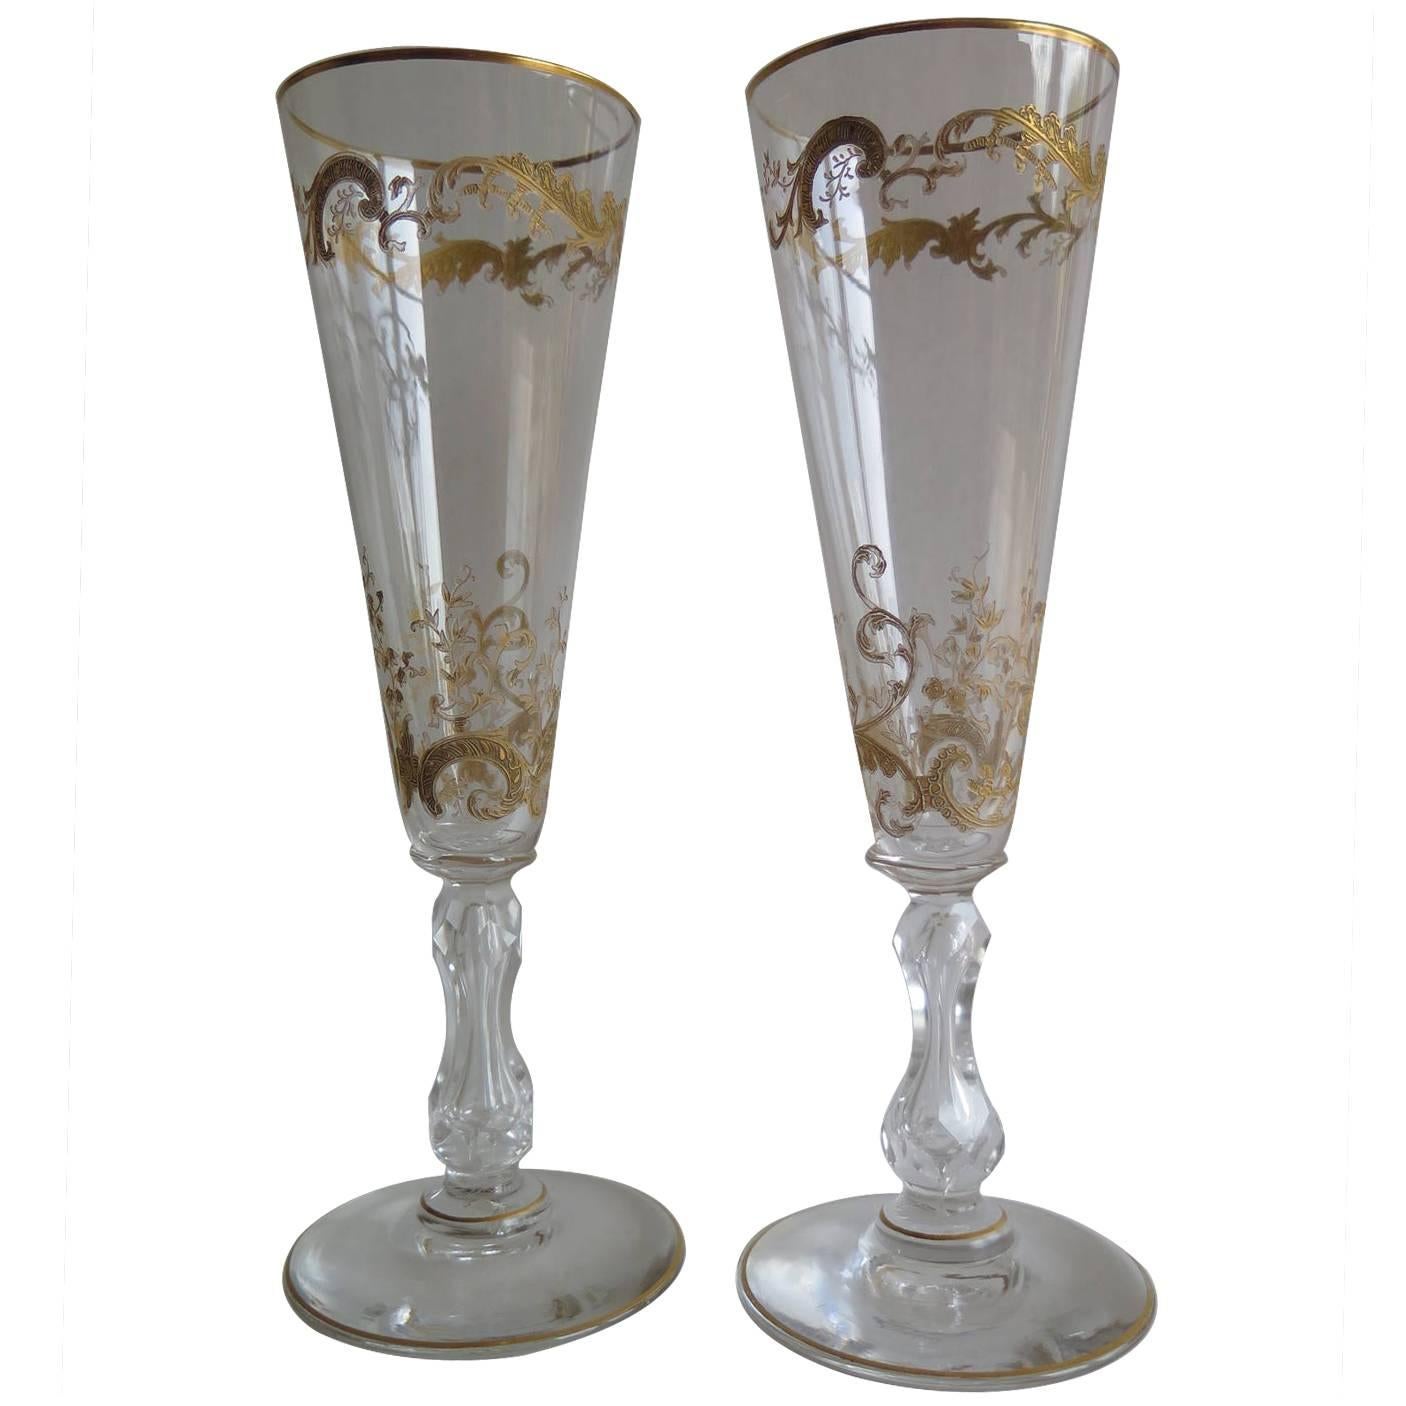 19th Century Pair of Gilded Champagne Flutes or Wine Glasses, French circa 1880